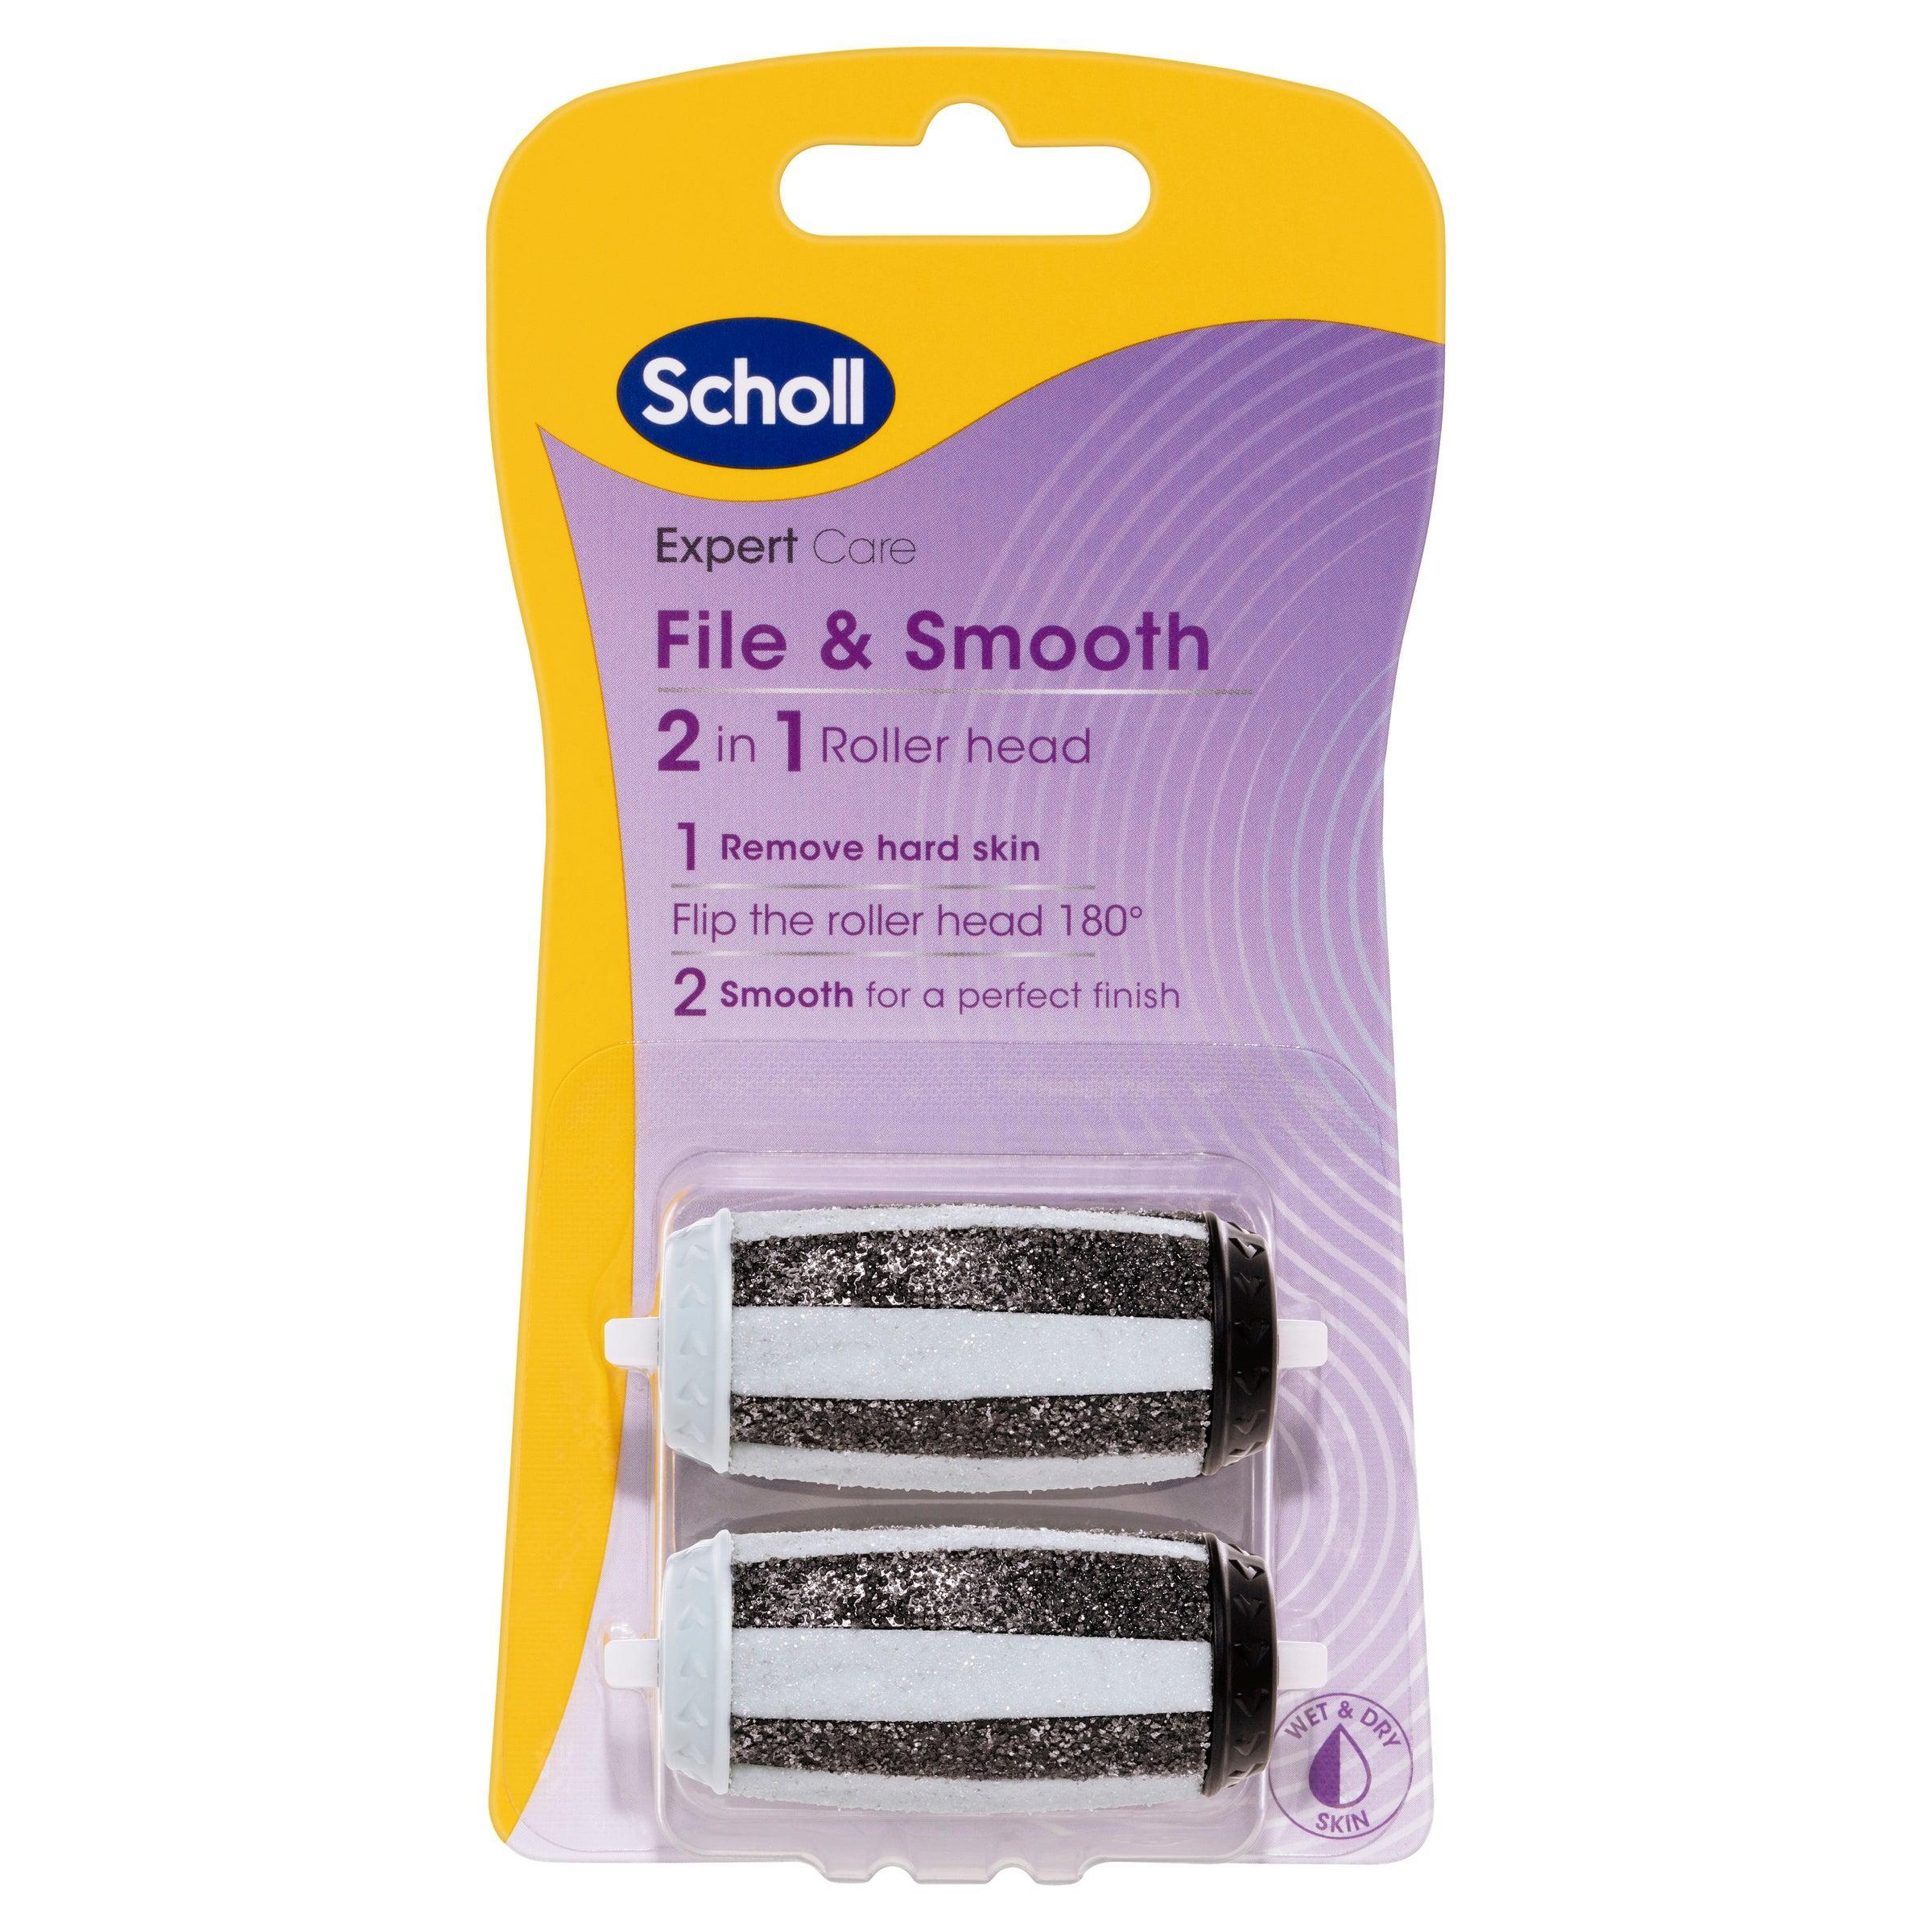 Scholl ExpertCare File And Smooth 2 In 1 Roller Head Refill 2 Pack